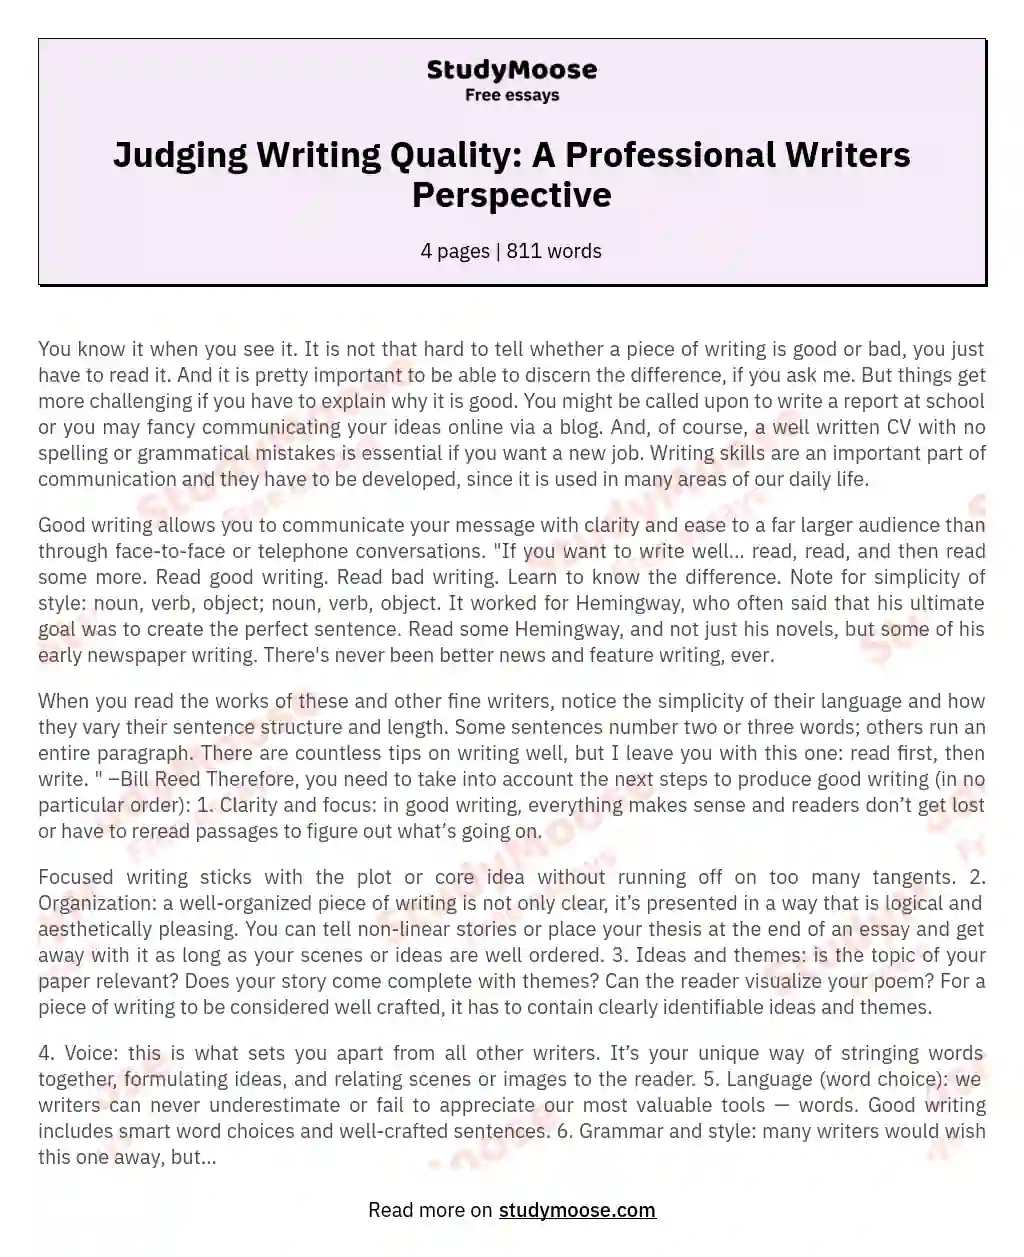 Judging Writing Quality: A Professional Writers Perspective essay